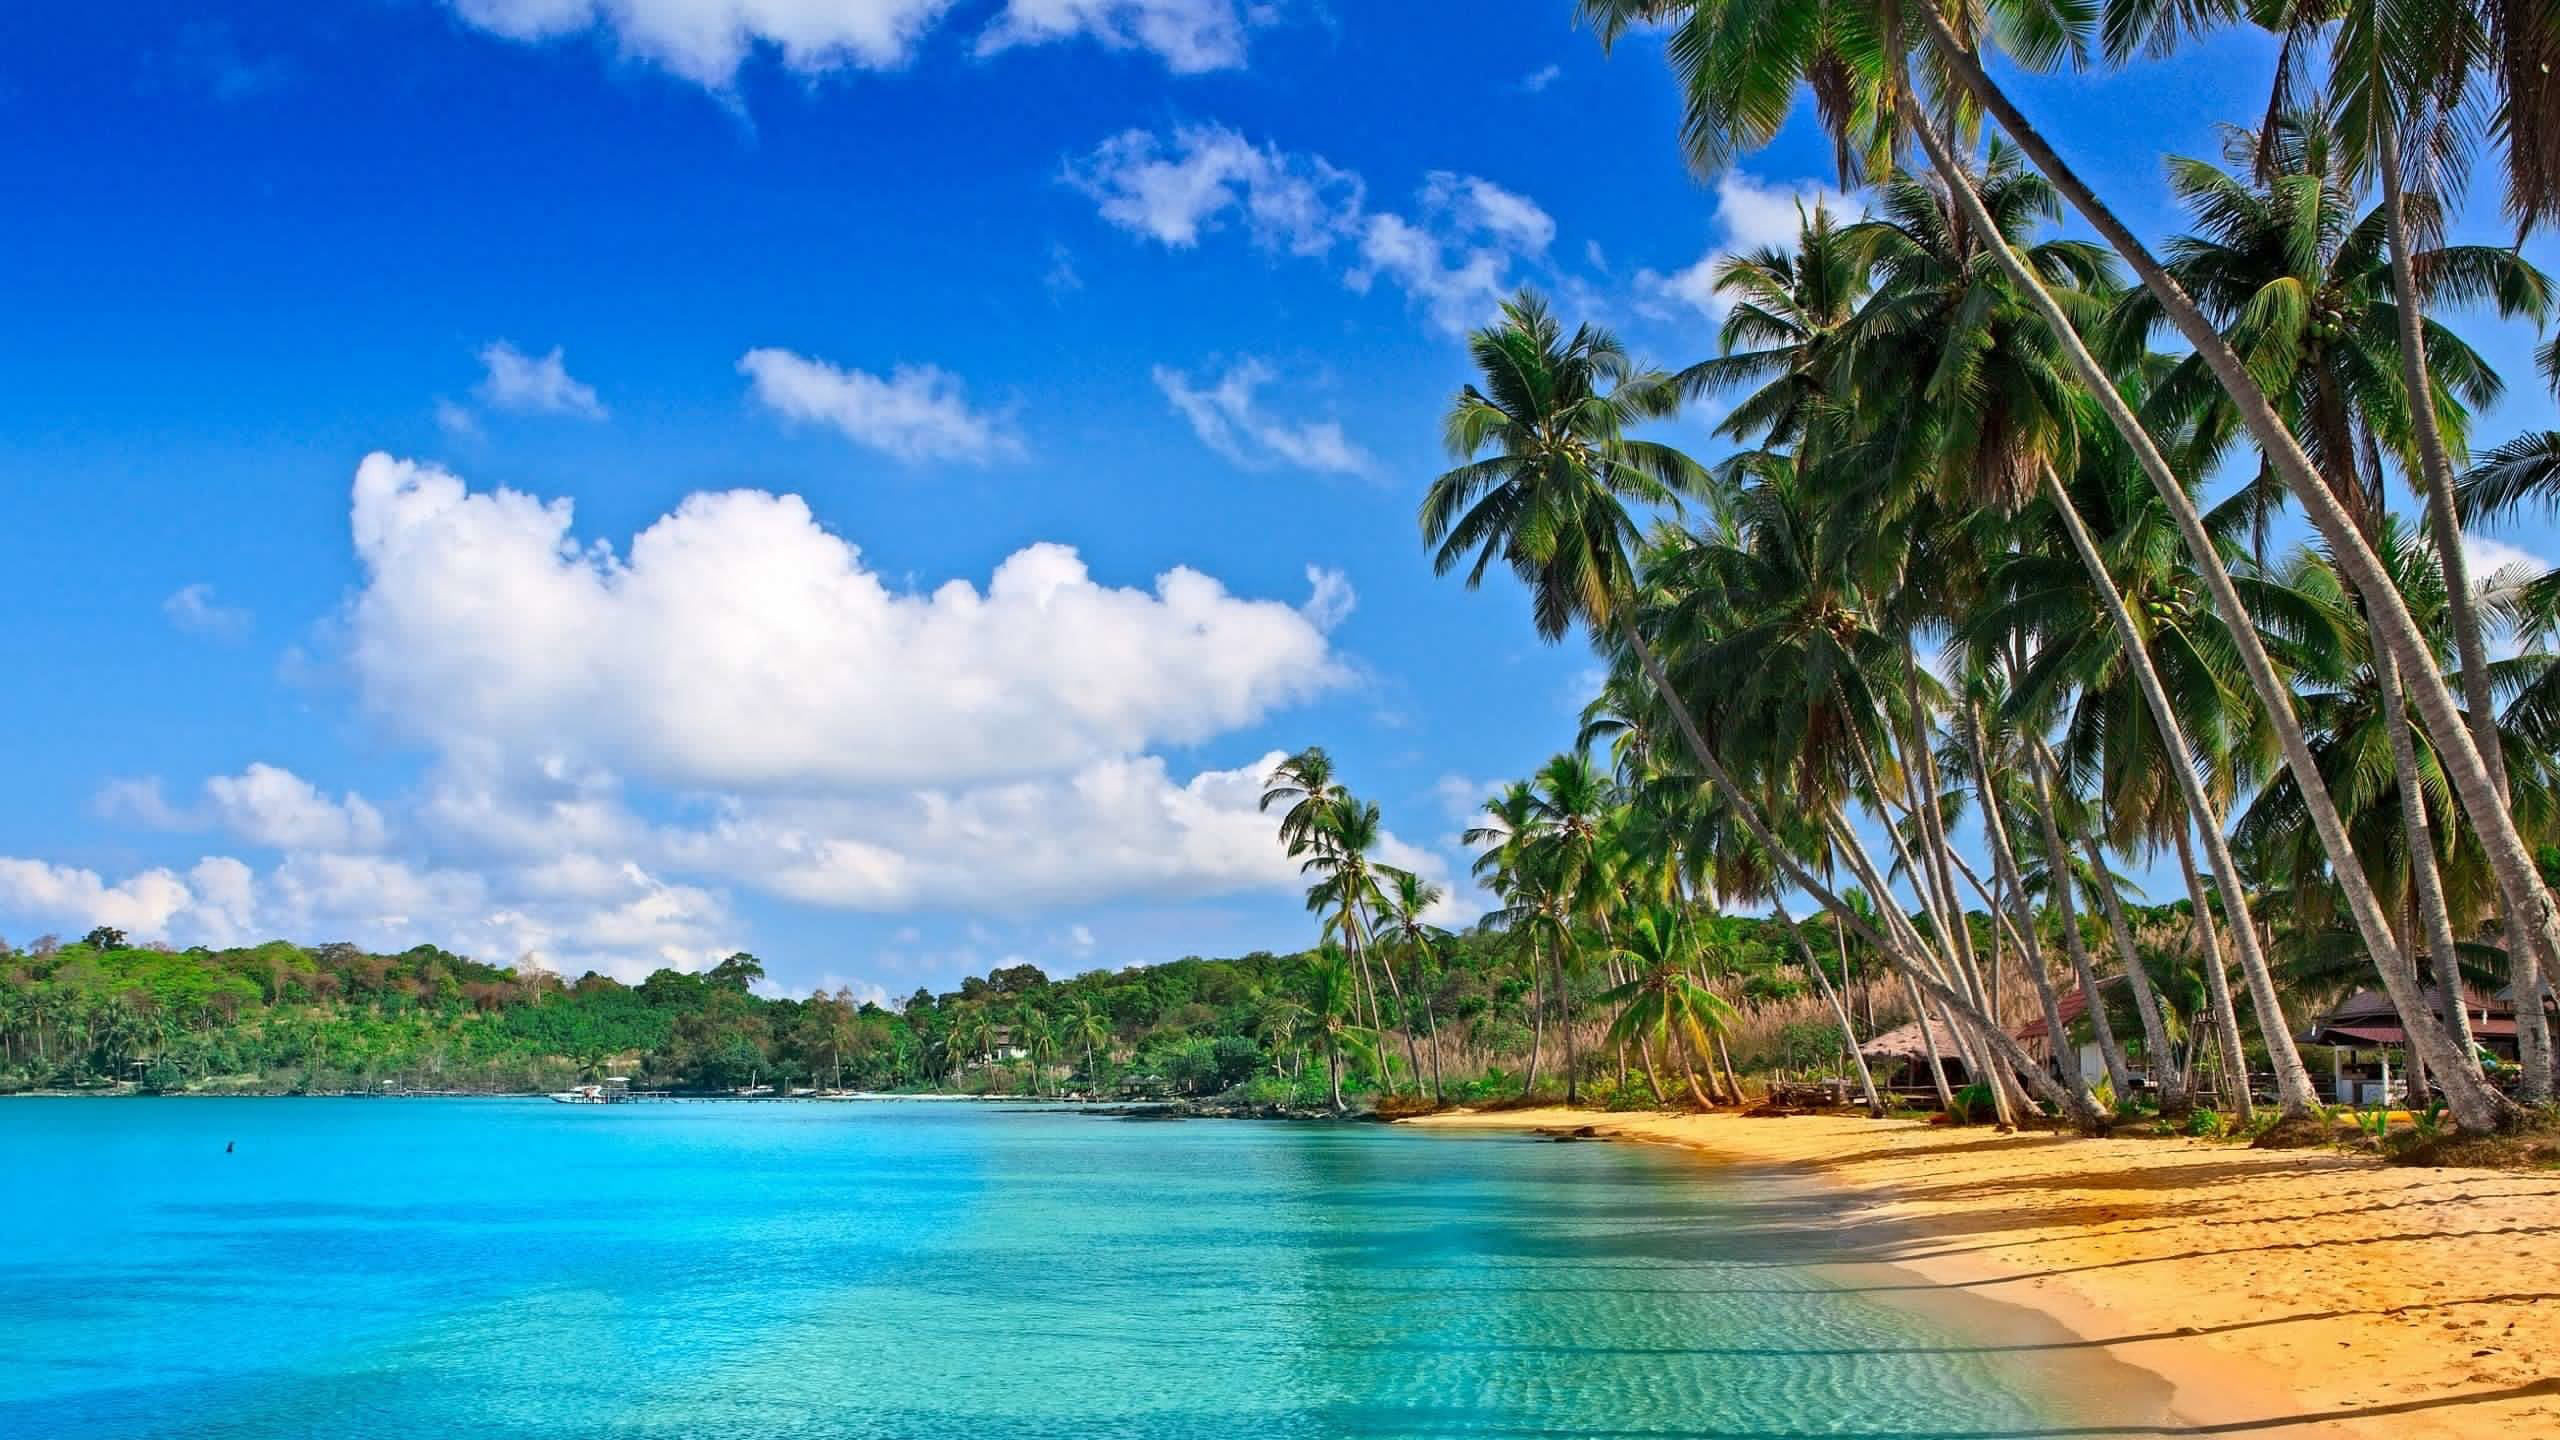 Calm Body Of Water Palm Trees On Beach Sand During Daytime Under White Clouds Blue Sky HD Ocean